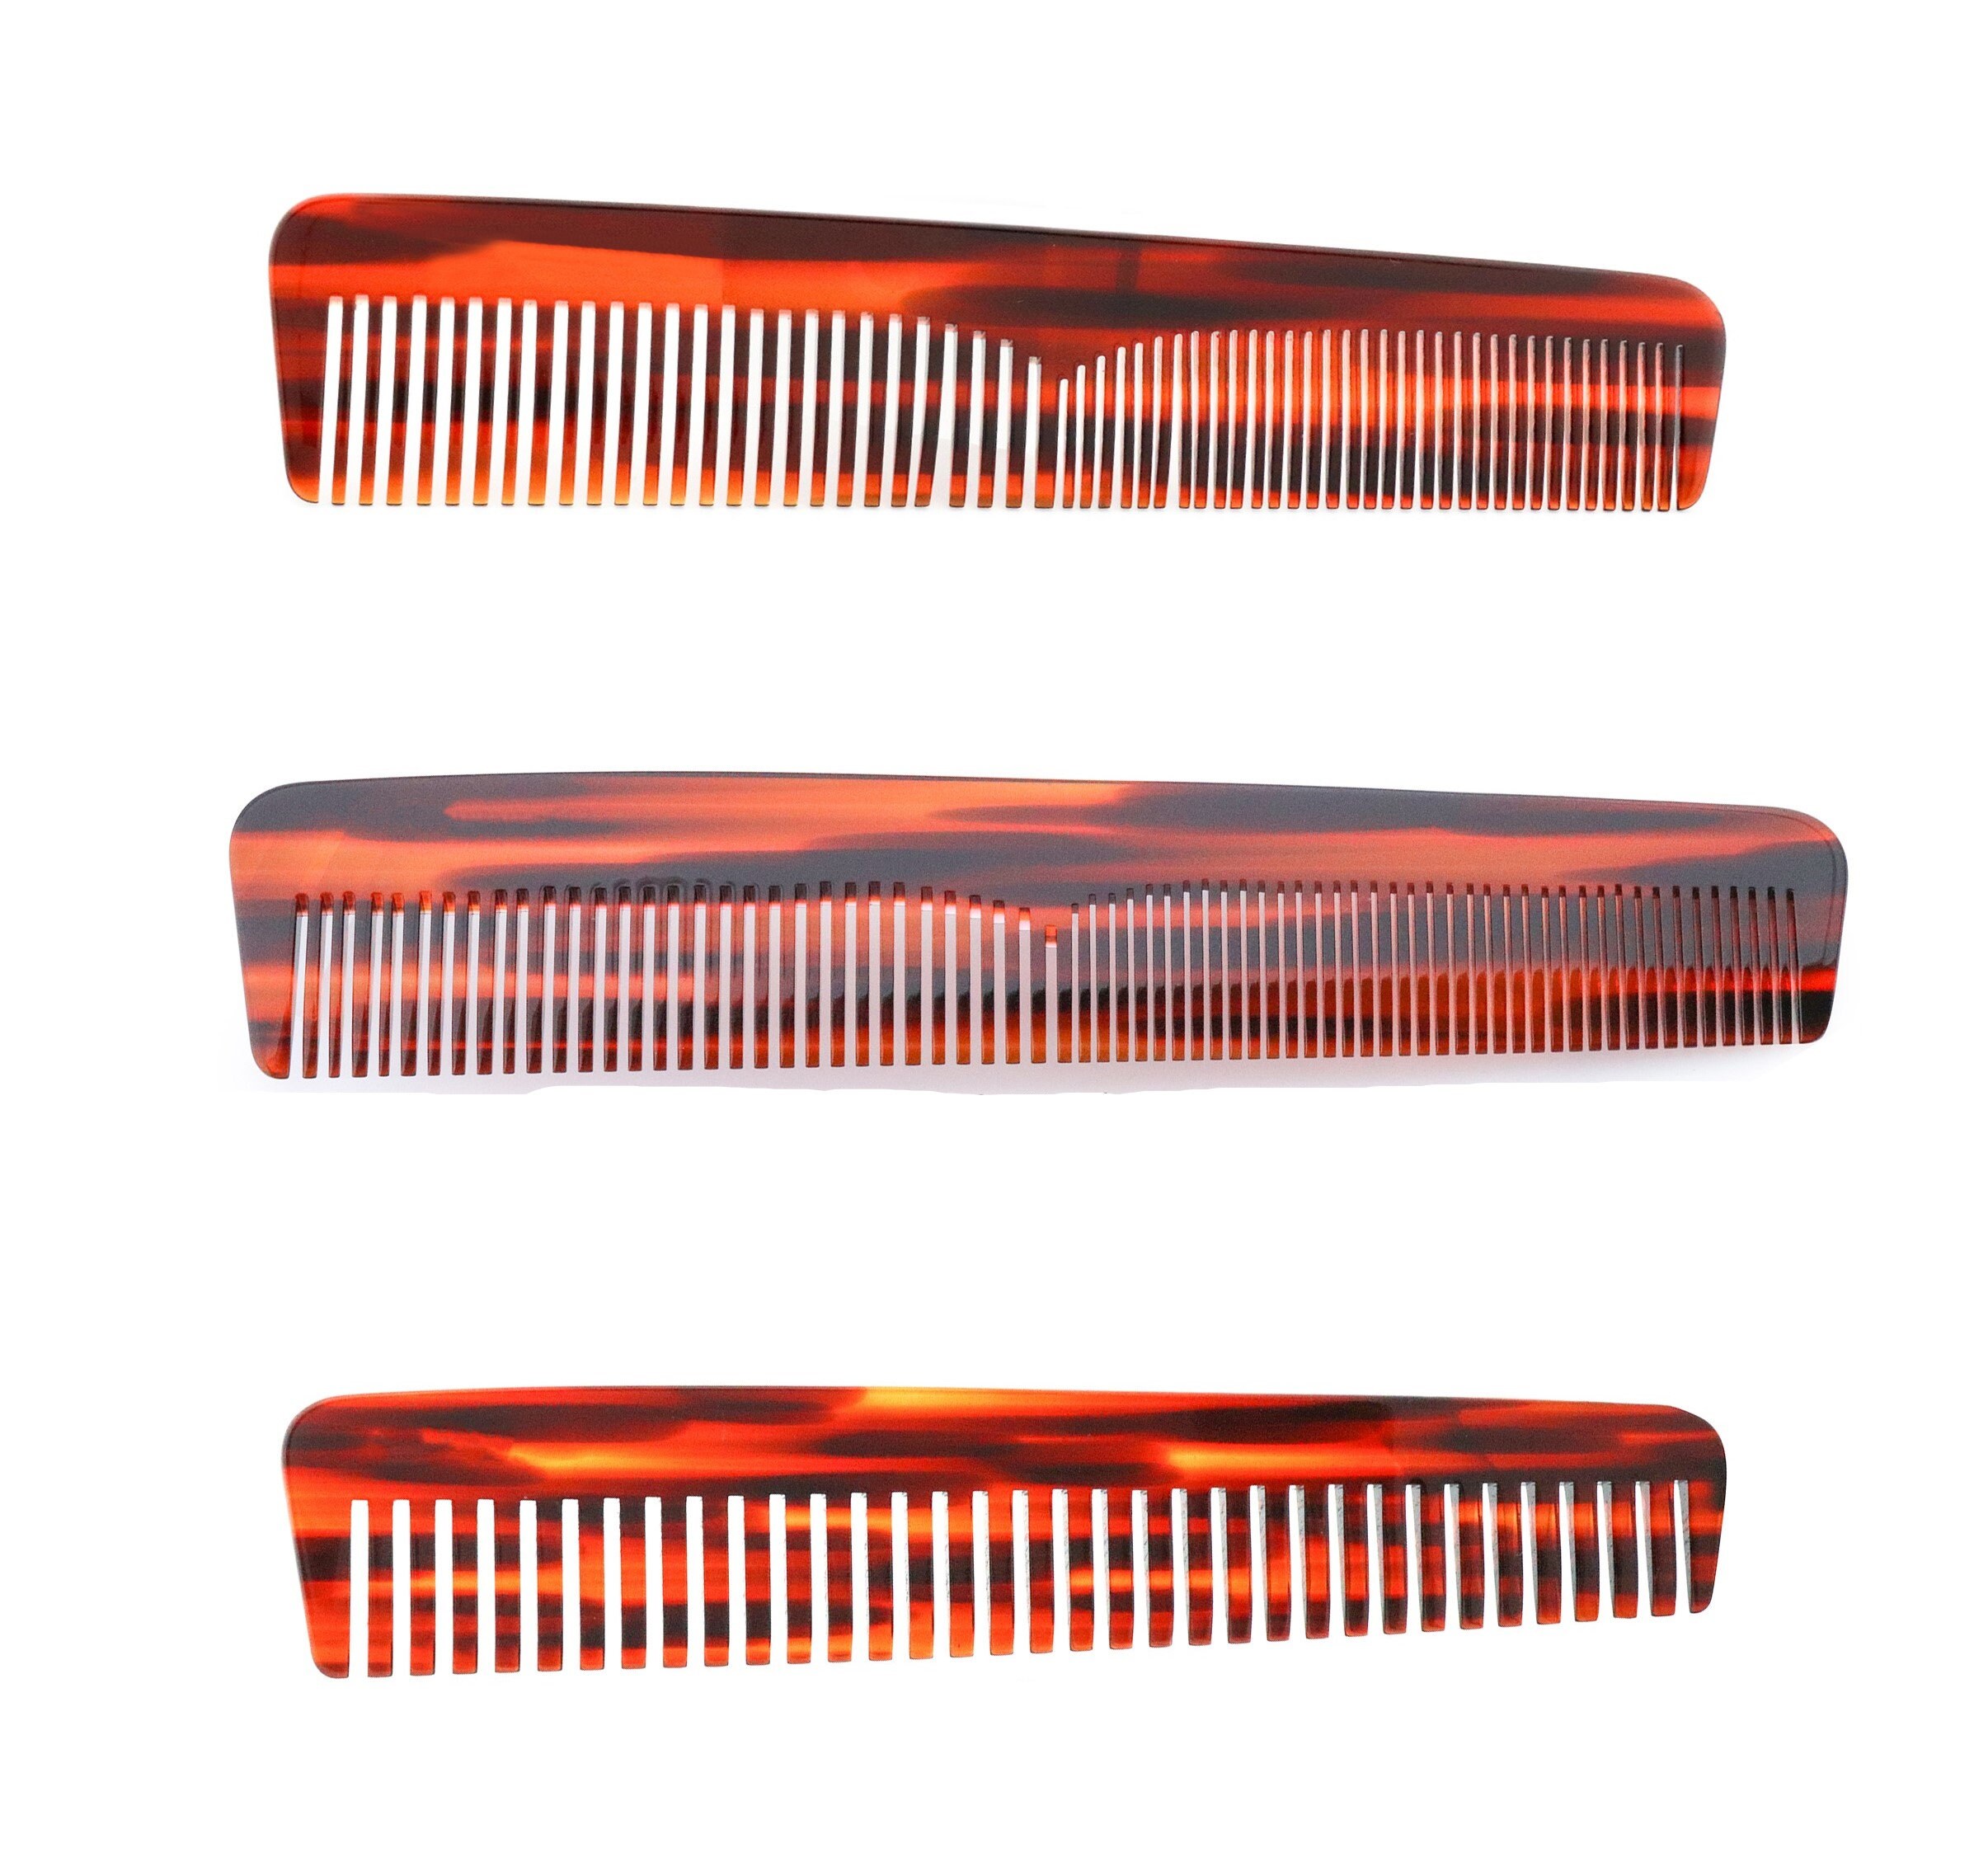 Shop FineTooth Hair Comb for Women from latest collection at Forever 21   511964